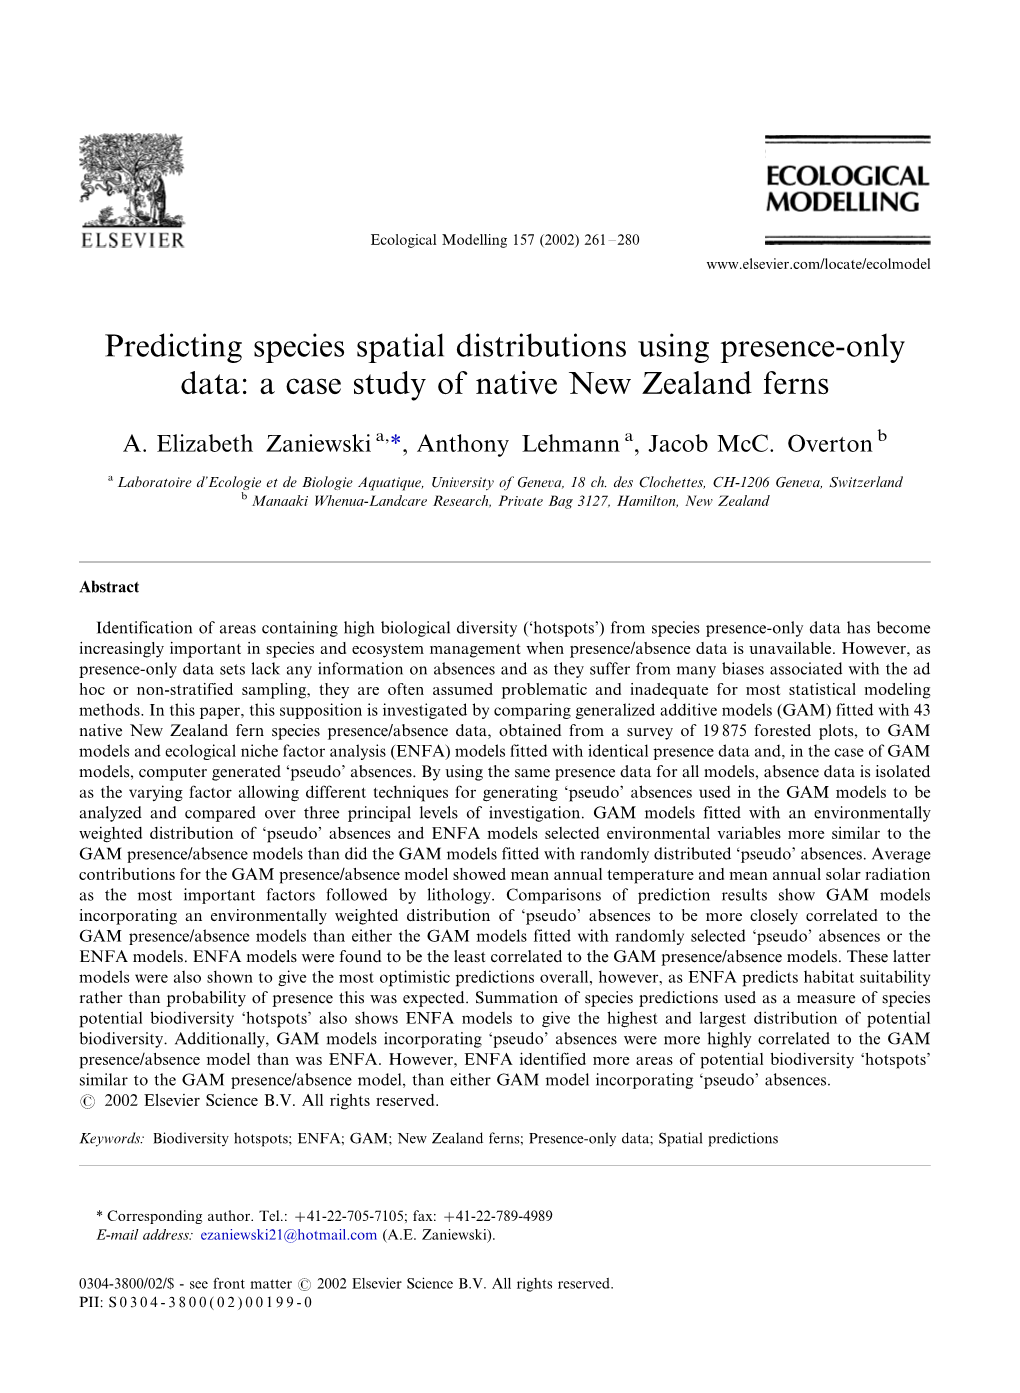 Predicting Species Spatial Distributions Using Presence-Only Data: a Case Study of Native New Zealand Ferns